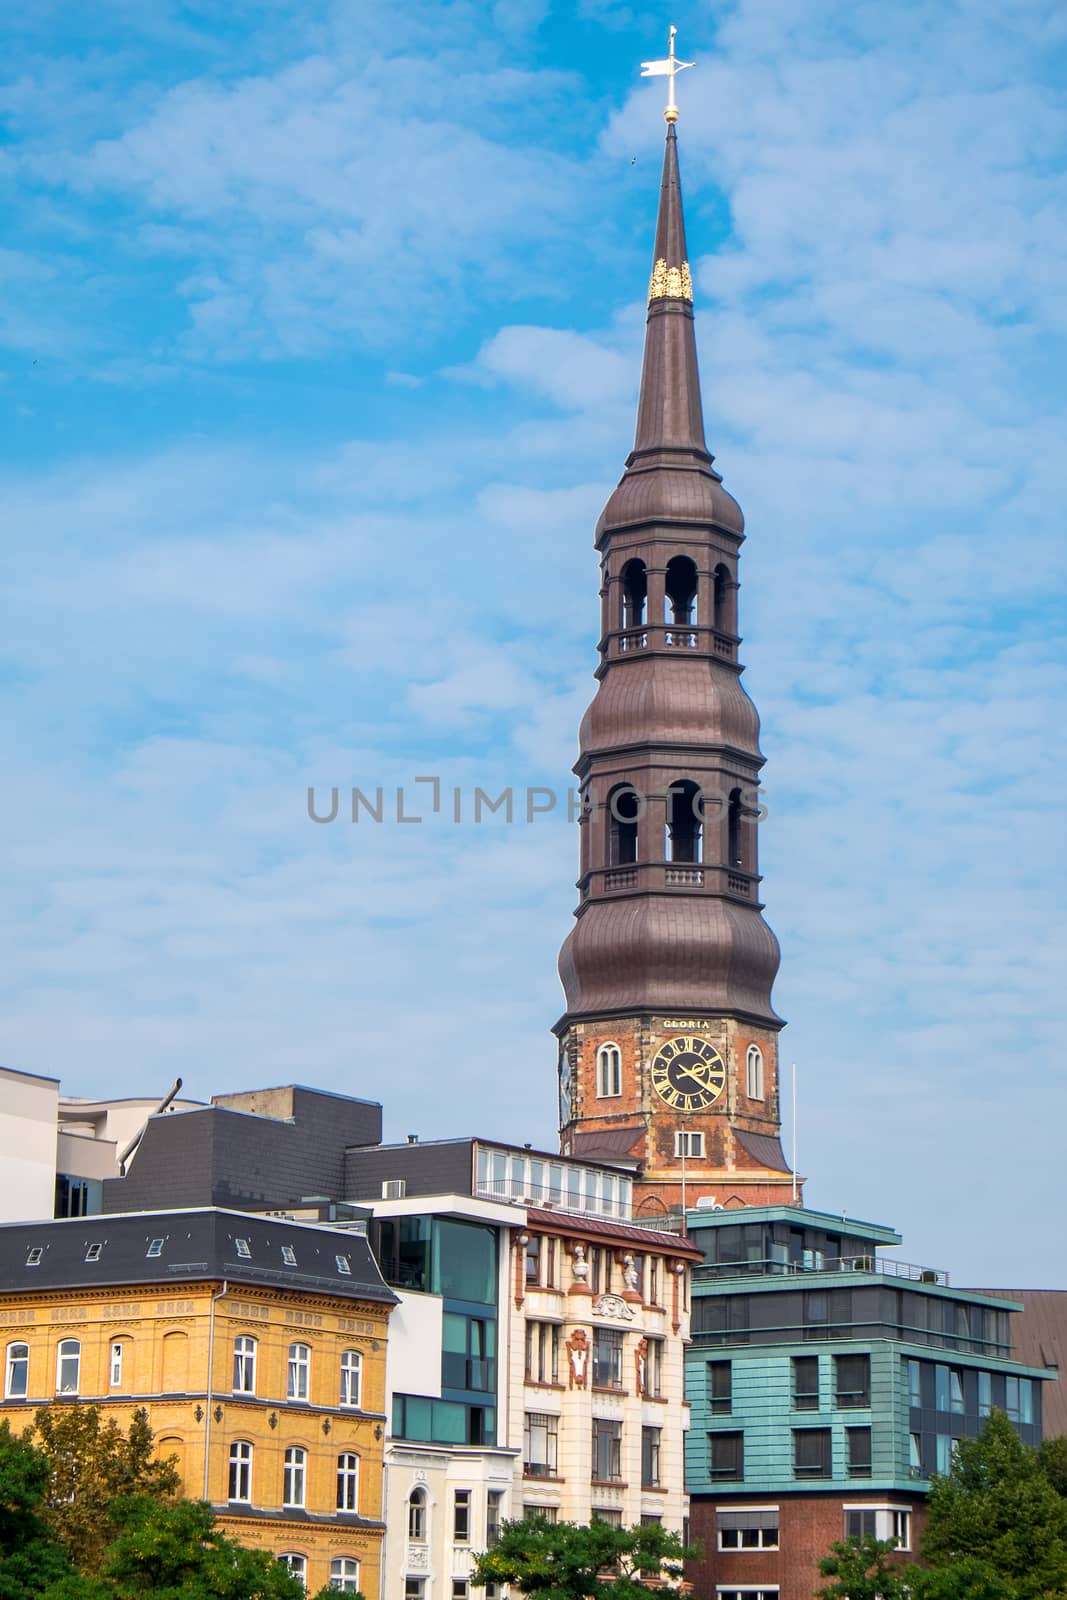 The tower of the Church of St. Catherine and some old houses in Hamburg, Germany